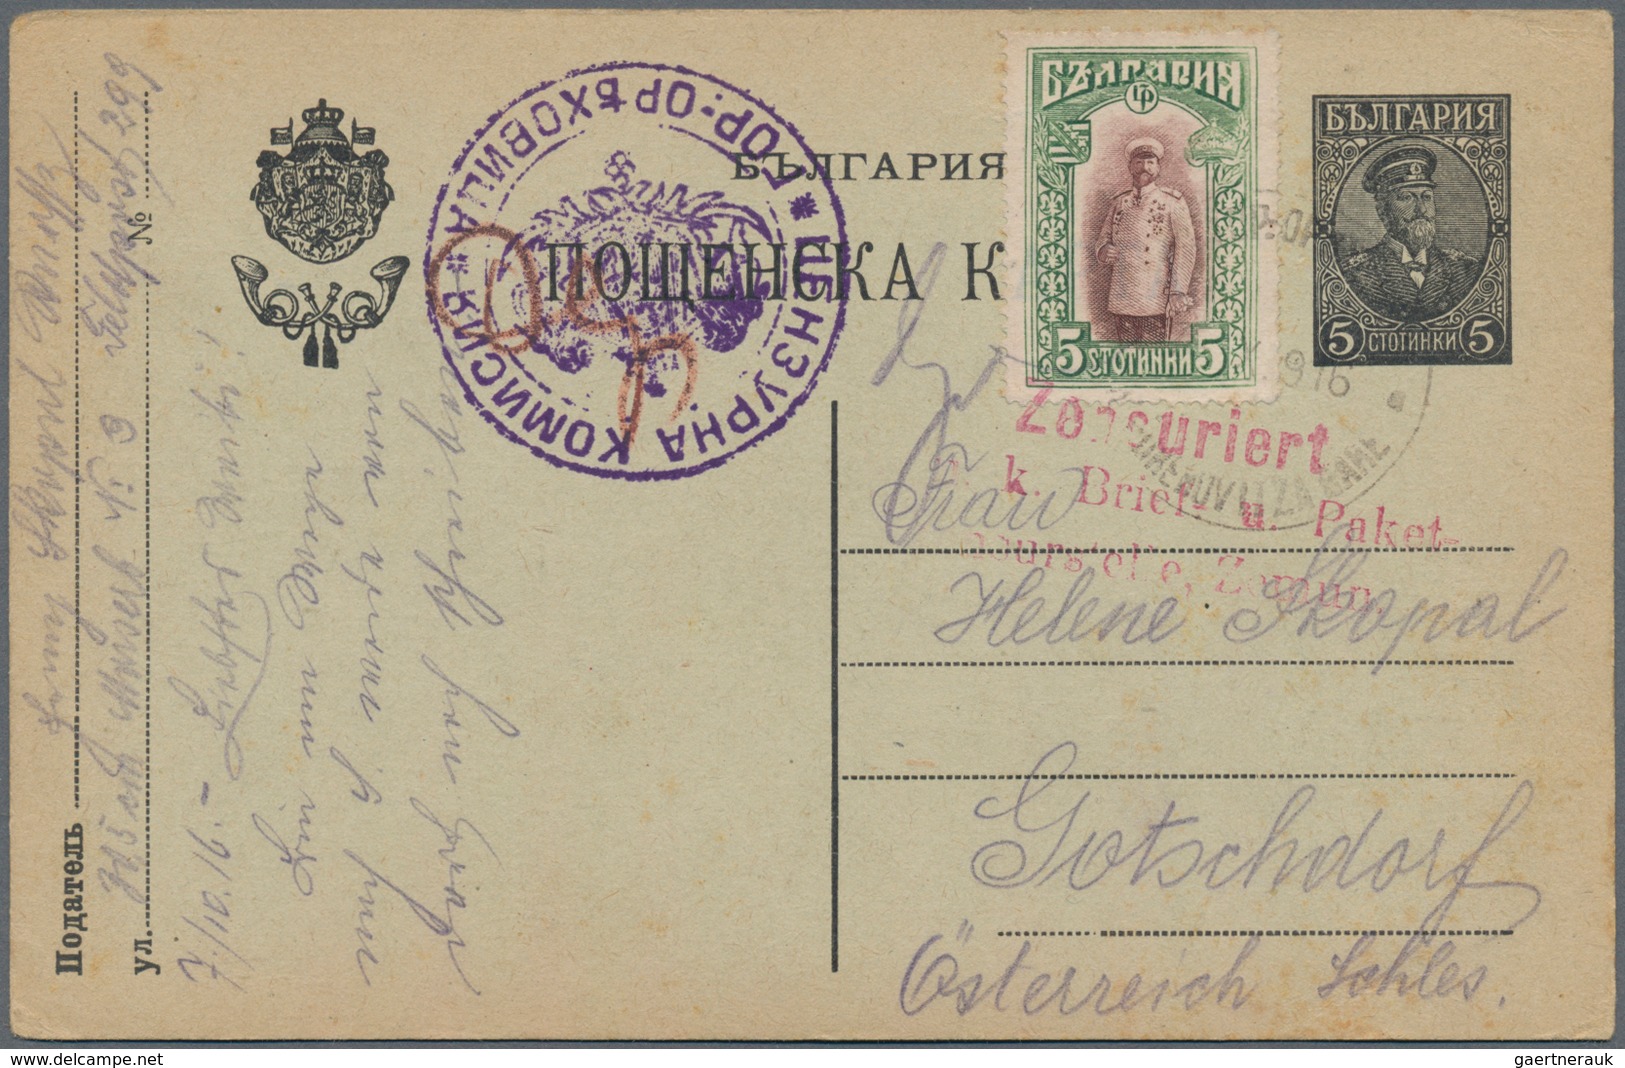 Bulgarien: 1916/1918, assortment of apprx. 73 censored covers/cards, usual poatal wear, interesting